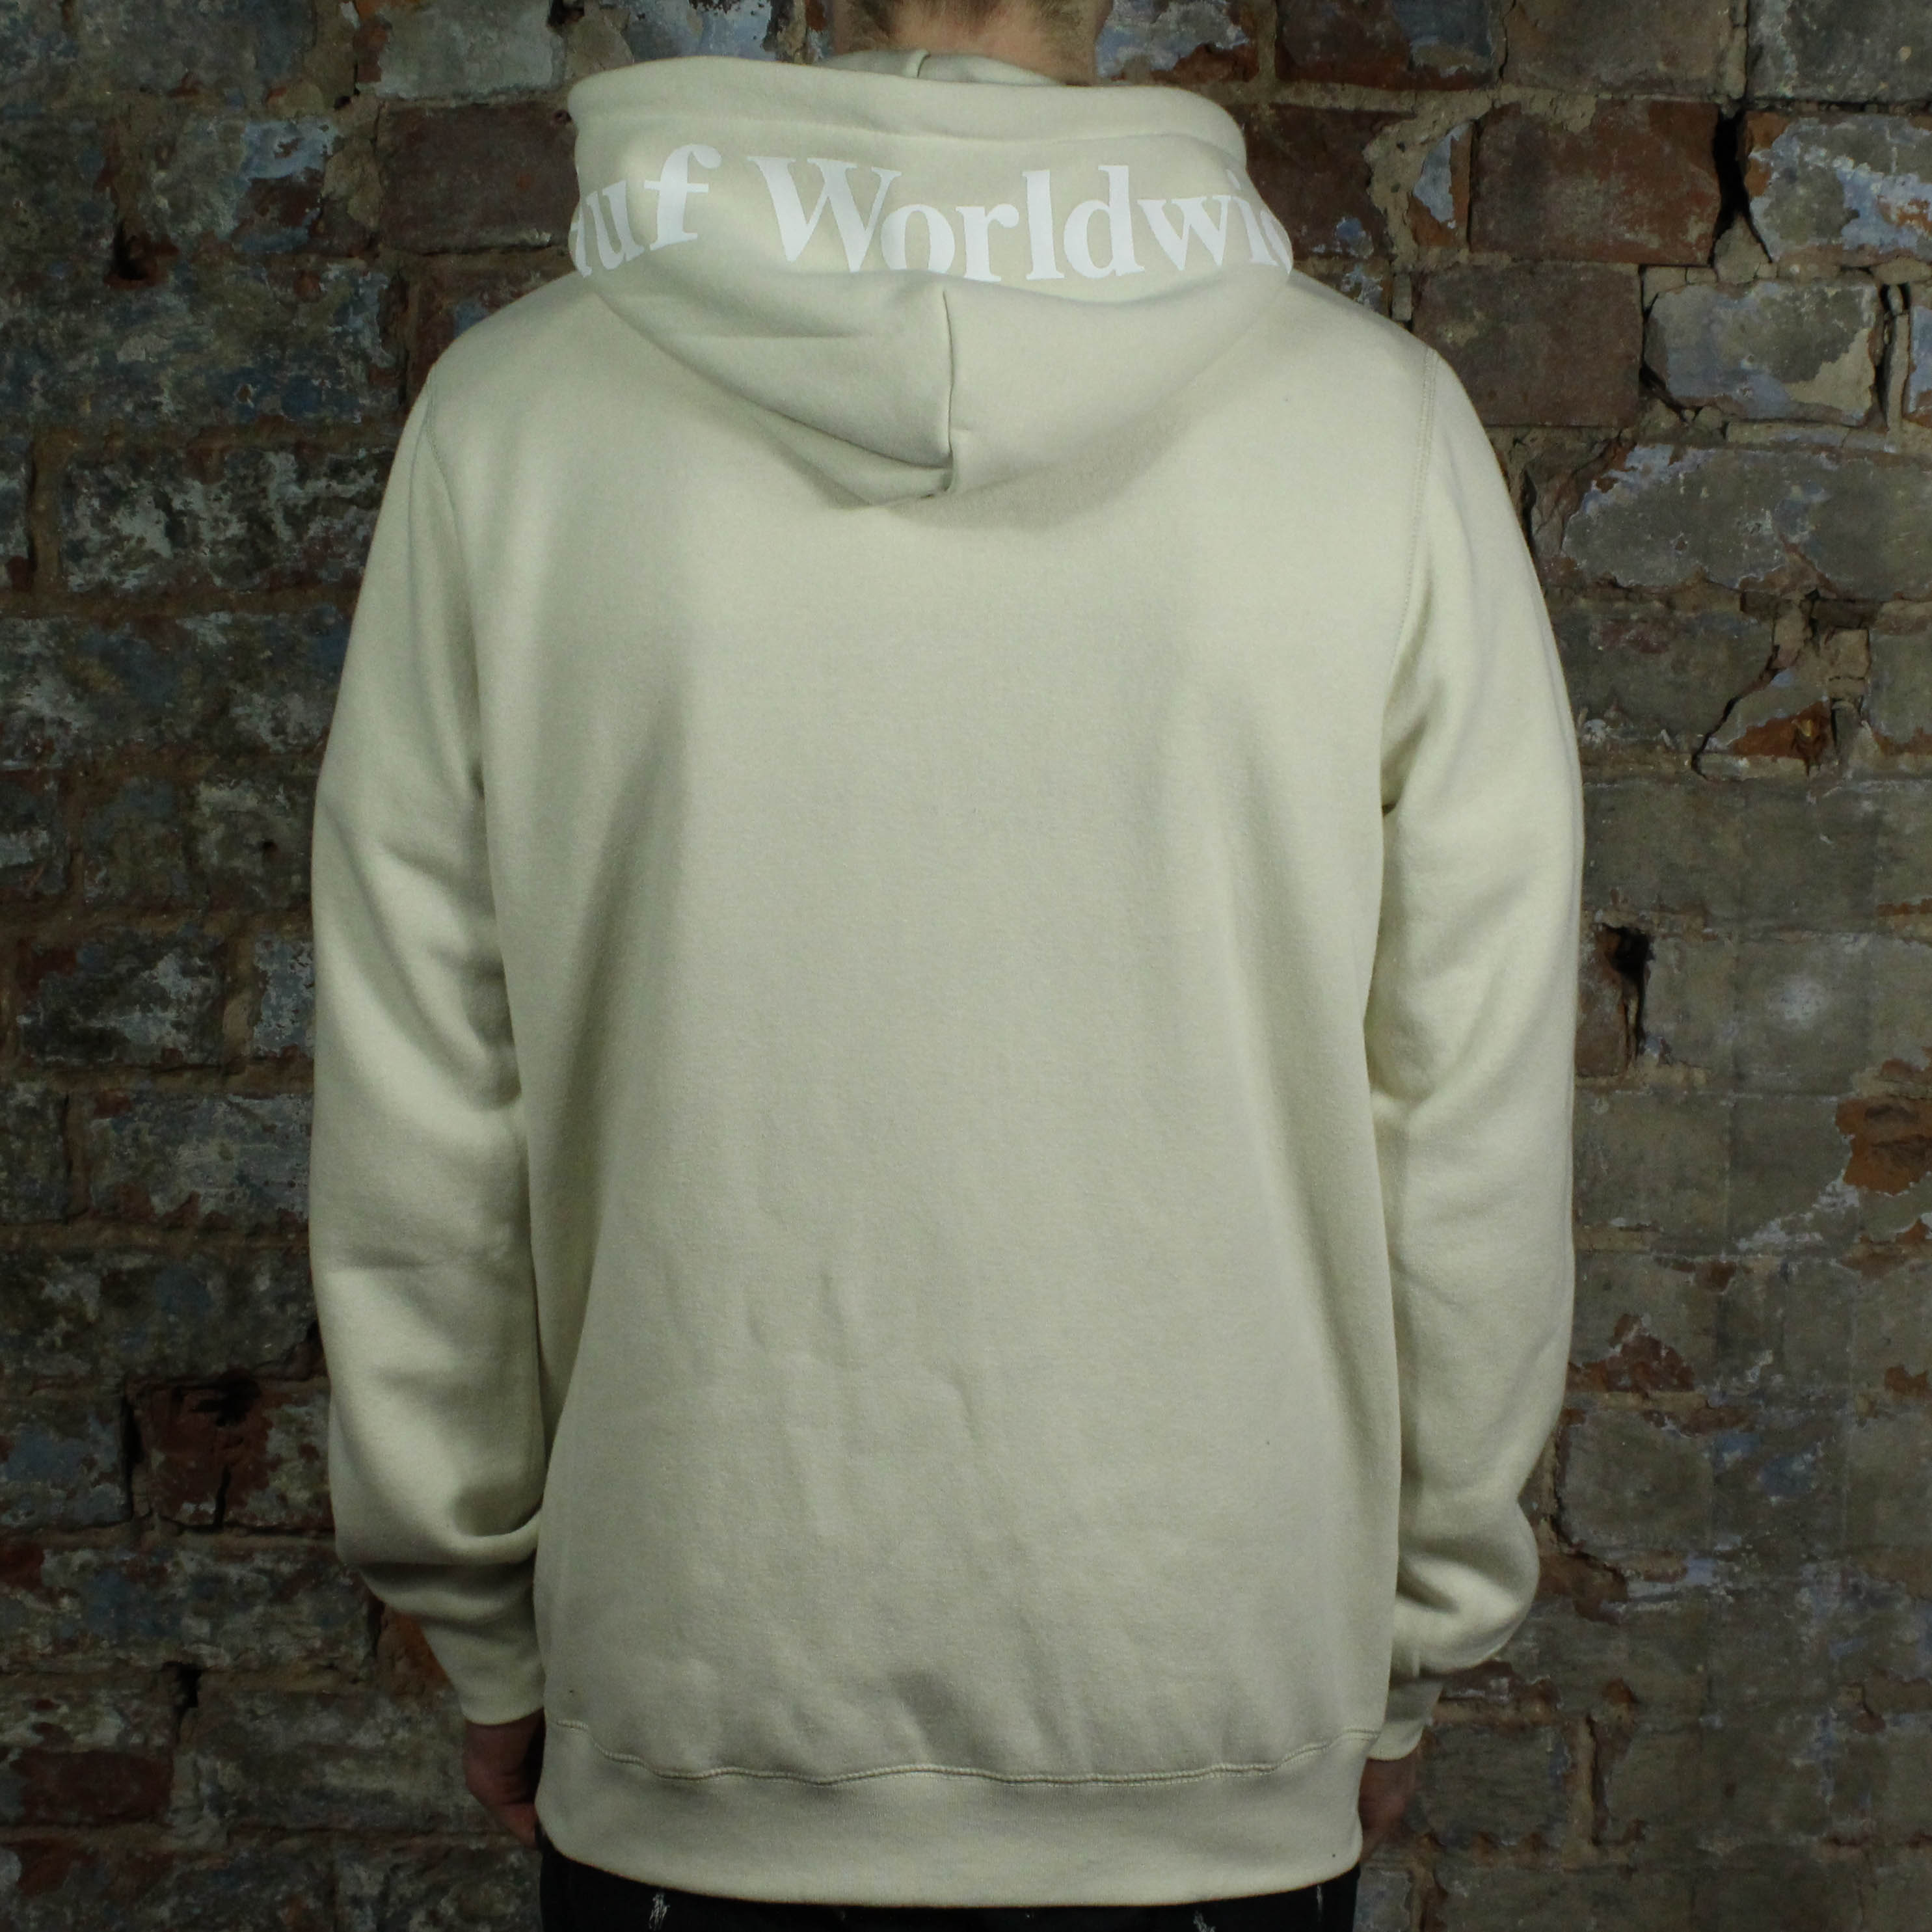 Green and White Box Logo - HUF Outline Box Logo Hooded Sweatshirt - Off White - Remix Casuals